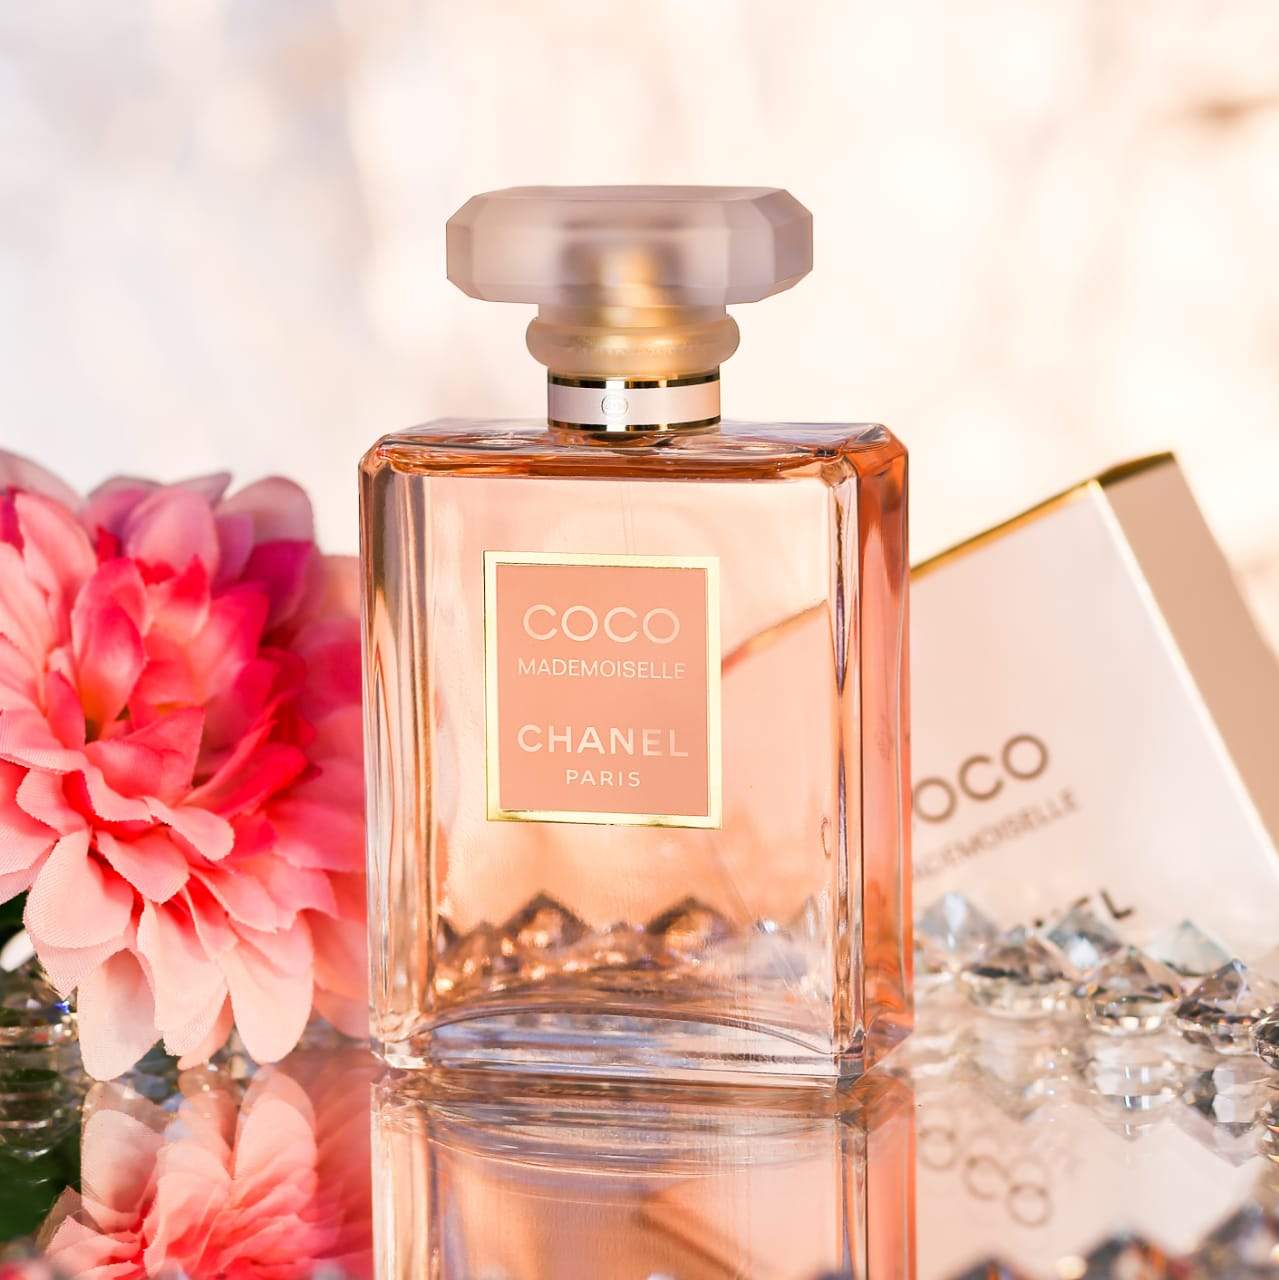 Chanel coco perfume for her Best designer perfumes online sales in  Nigeria Fragrancescomng